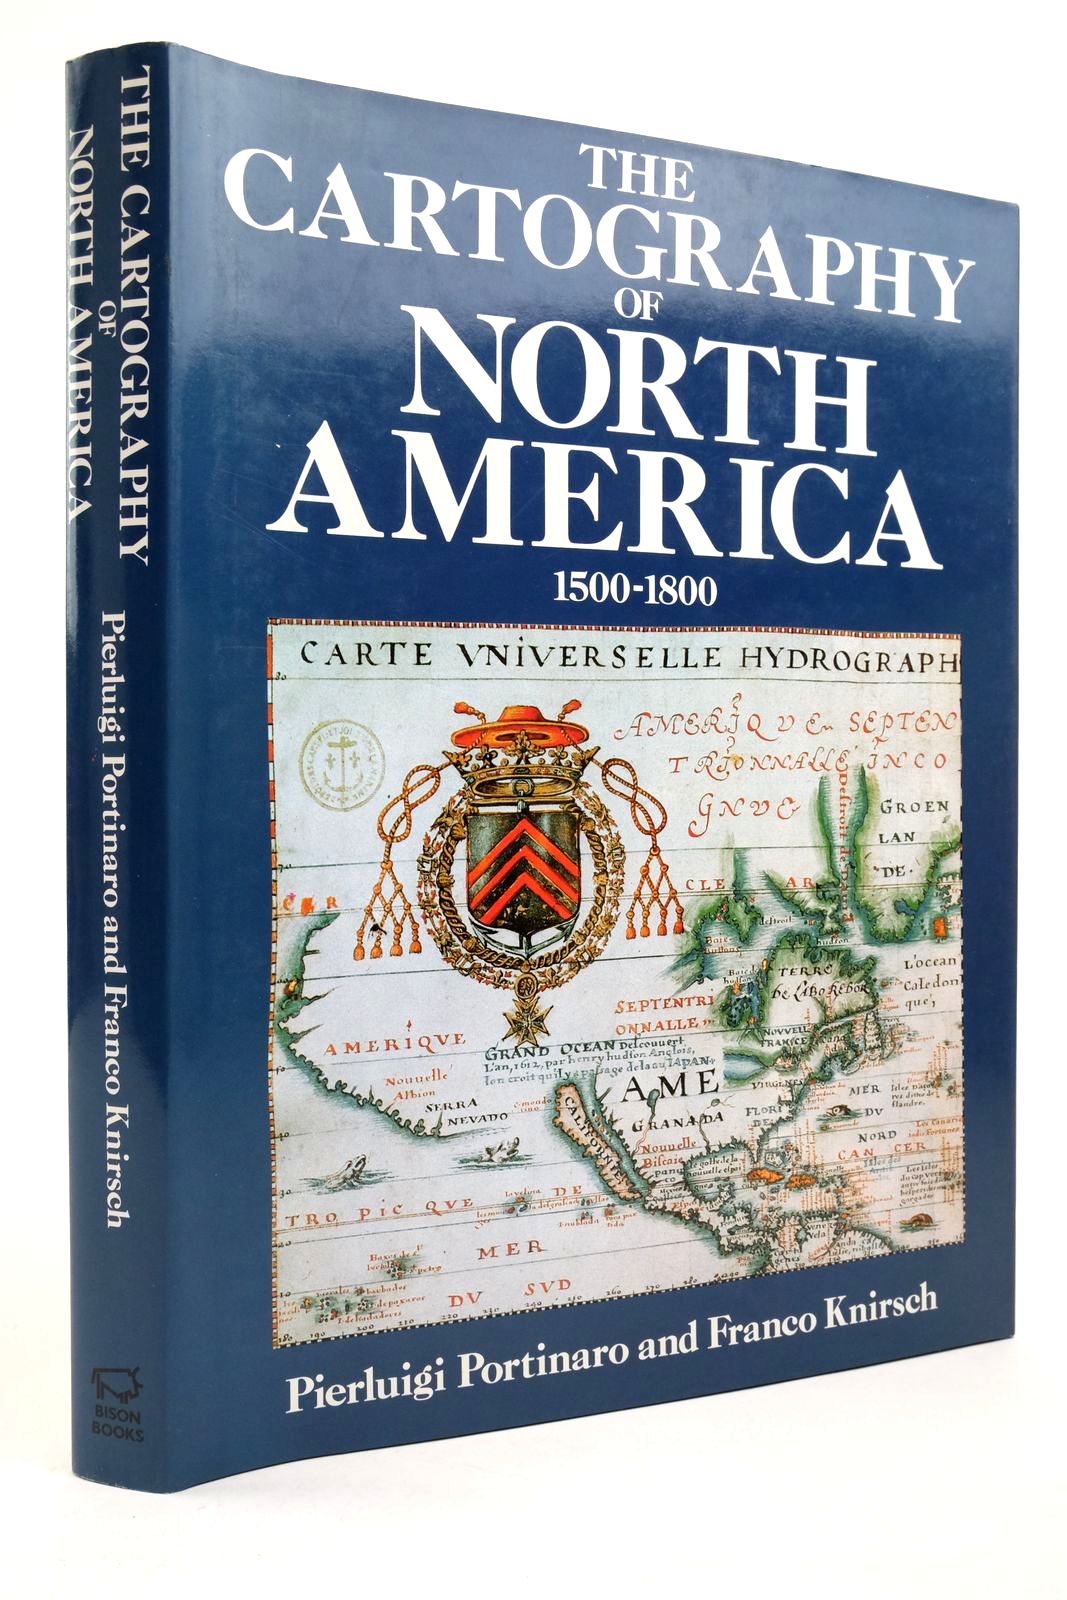 Photo of THE CARTOGRAPHY OF NORTH AMERICA 1500 - 1800 written by Portinaro, Pierluigi Knirsch, Franco published by Bison Books (STOCK CODE: 2138637)  for sale by Stella & Rose's Books